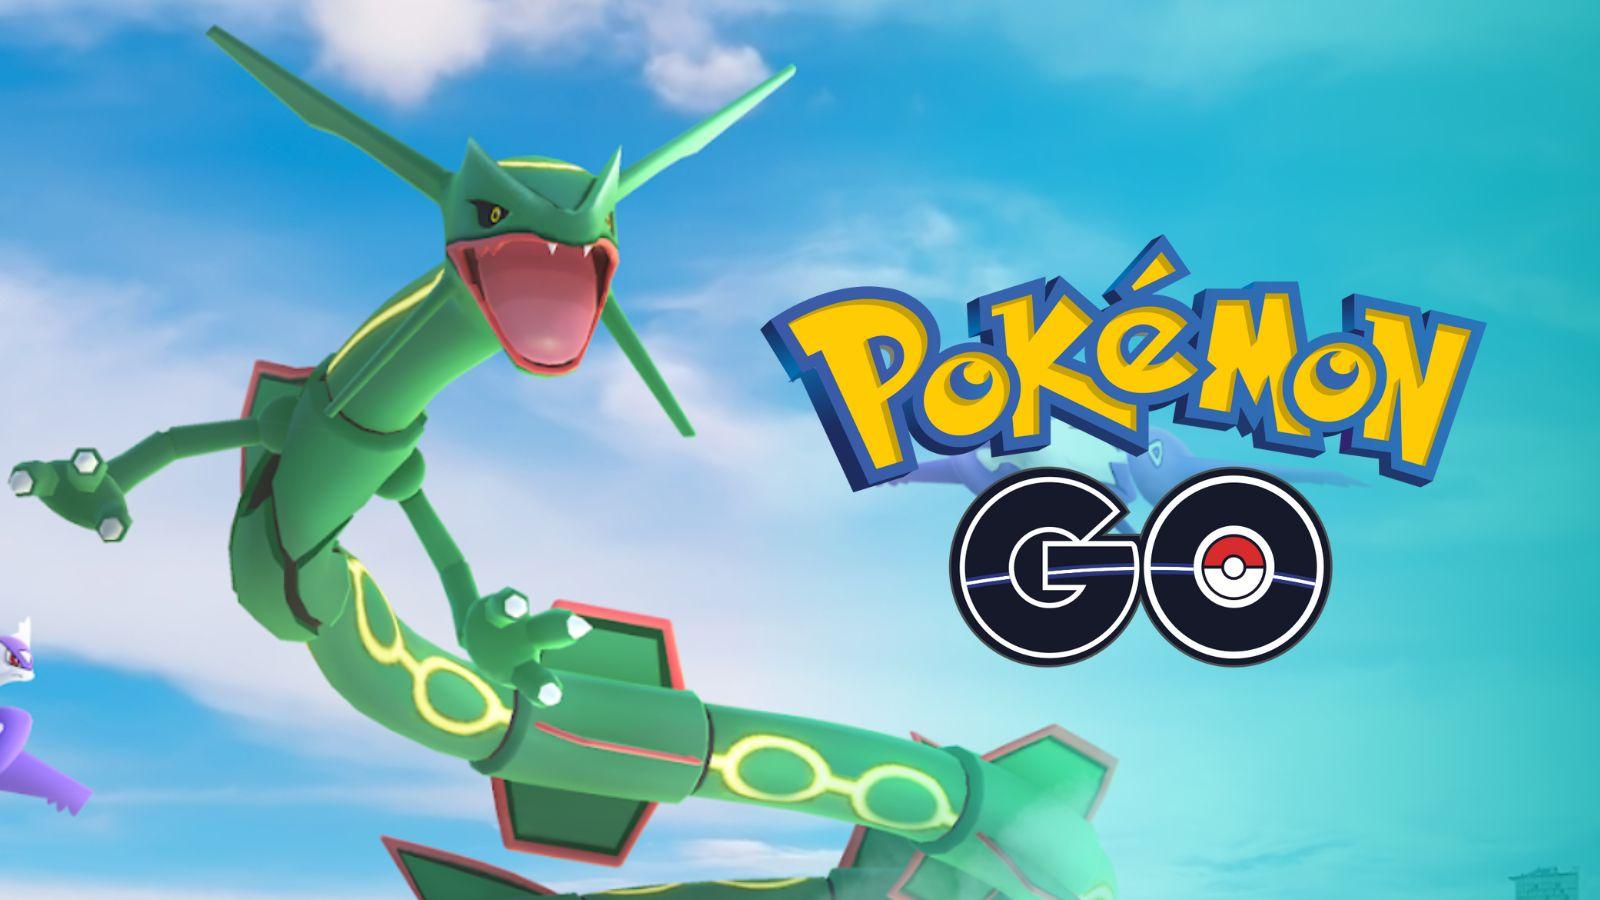 Pokemon Go Primal Rumblings event Dates, Rayquaza featured attack